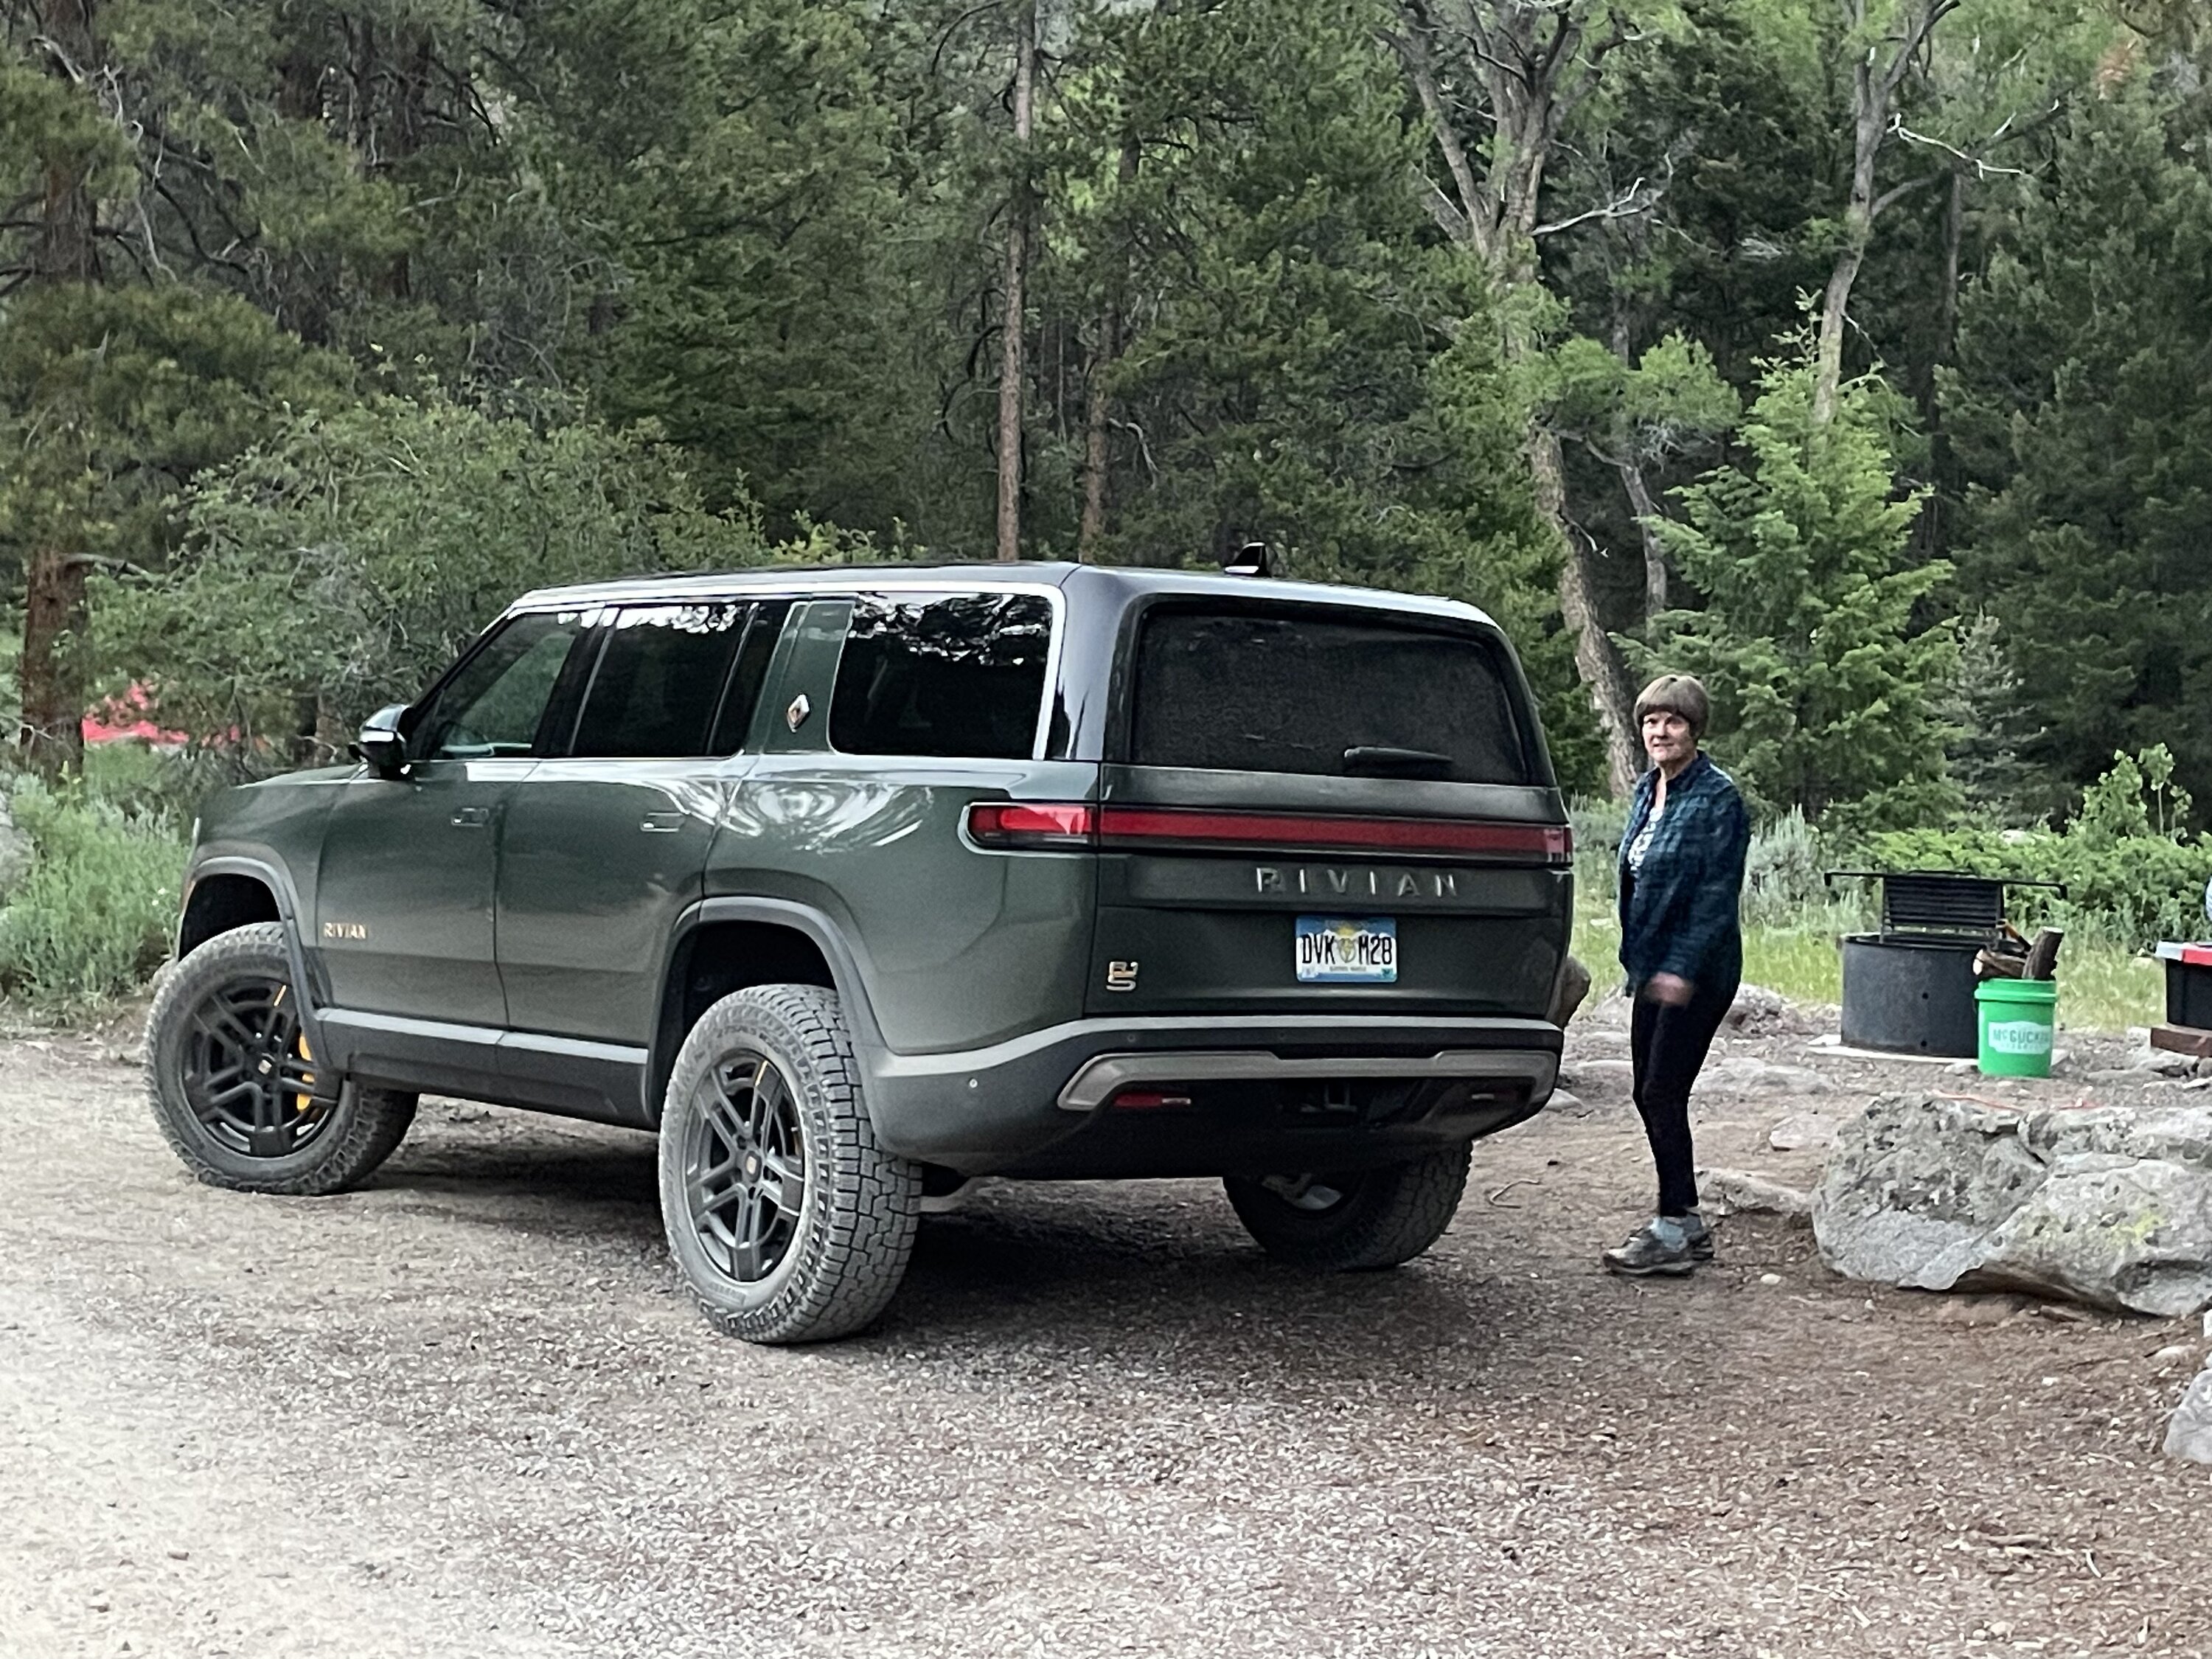 Car camping with induction stove and espresso machine is pretty sweet   Rivian Forum - R1T R1S R2 News, Specs, Models, RIVN Stock 